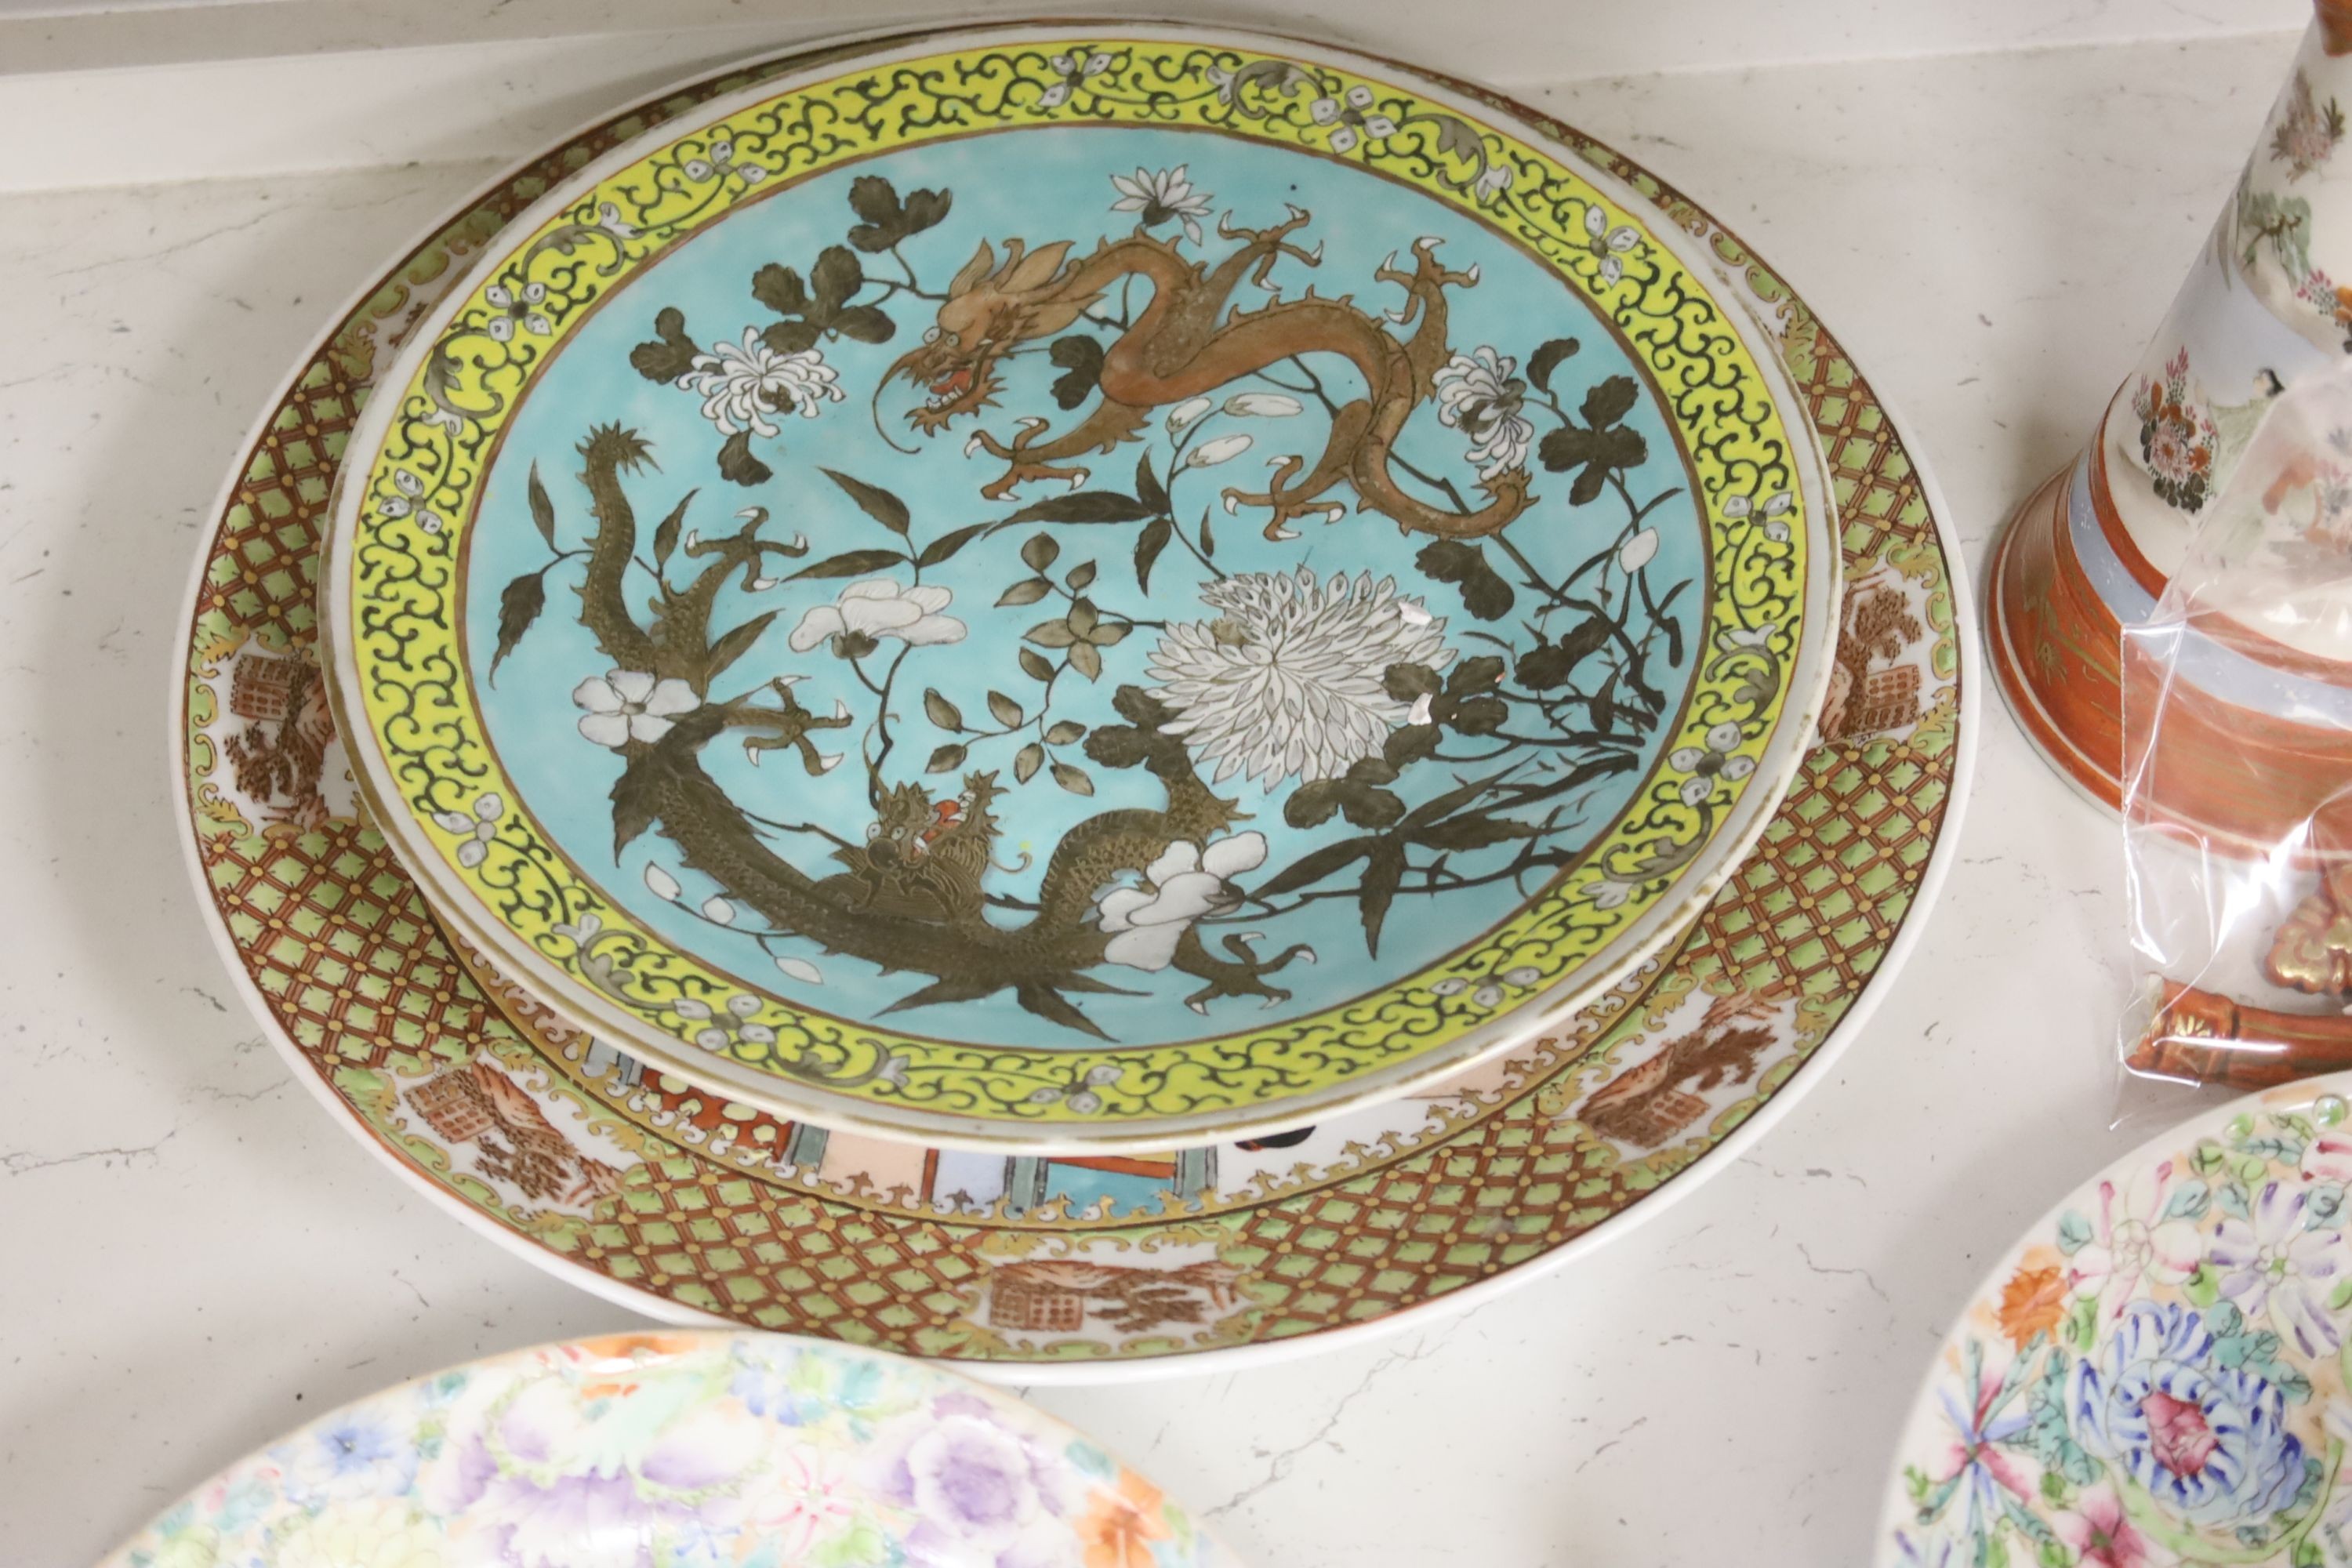 Two Chinese ‘millefleur’ dishes, a turquoise ground ‘Dragon’ dish Guangxu mark and period, a late 19th century famille rose jar etc.